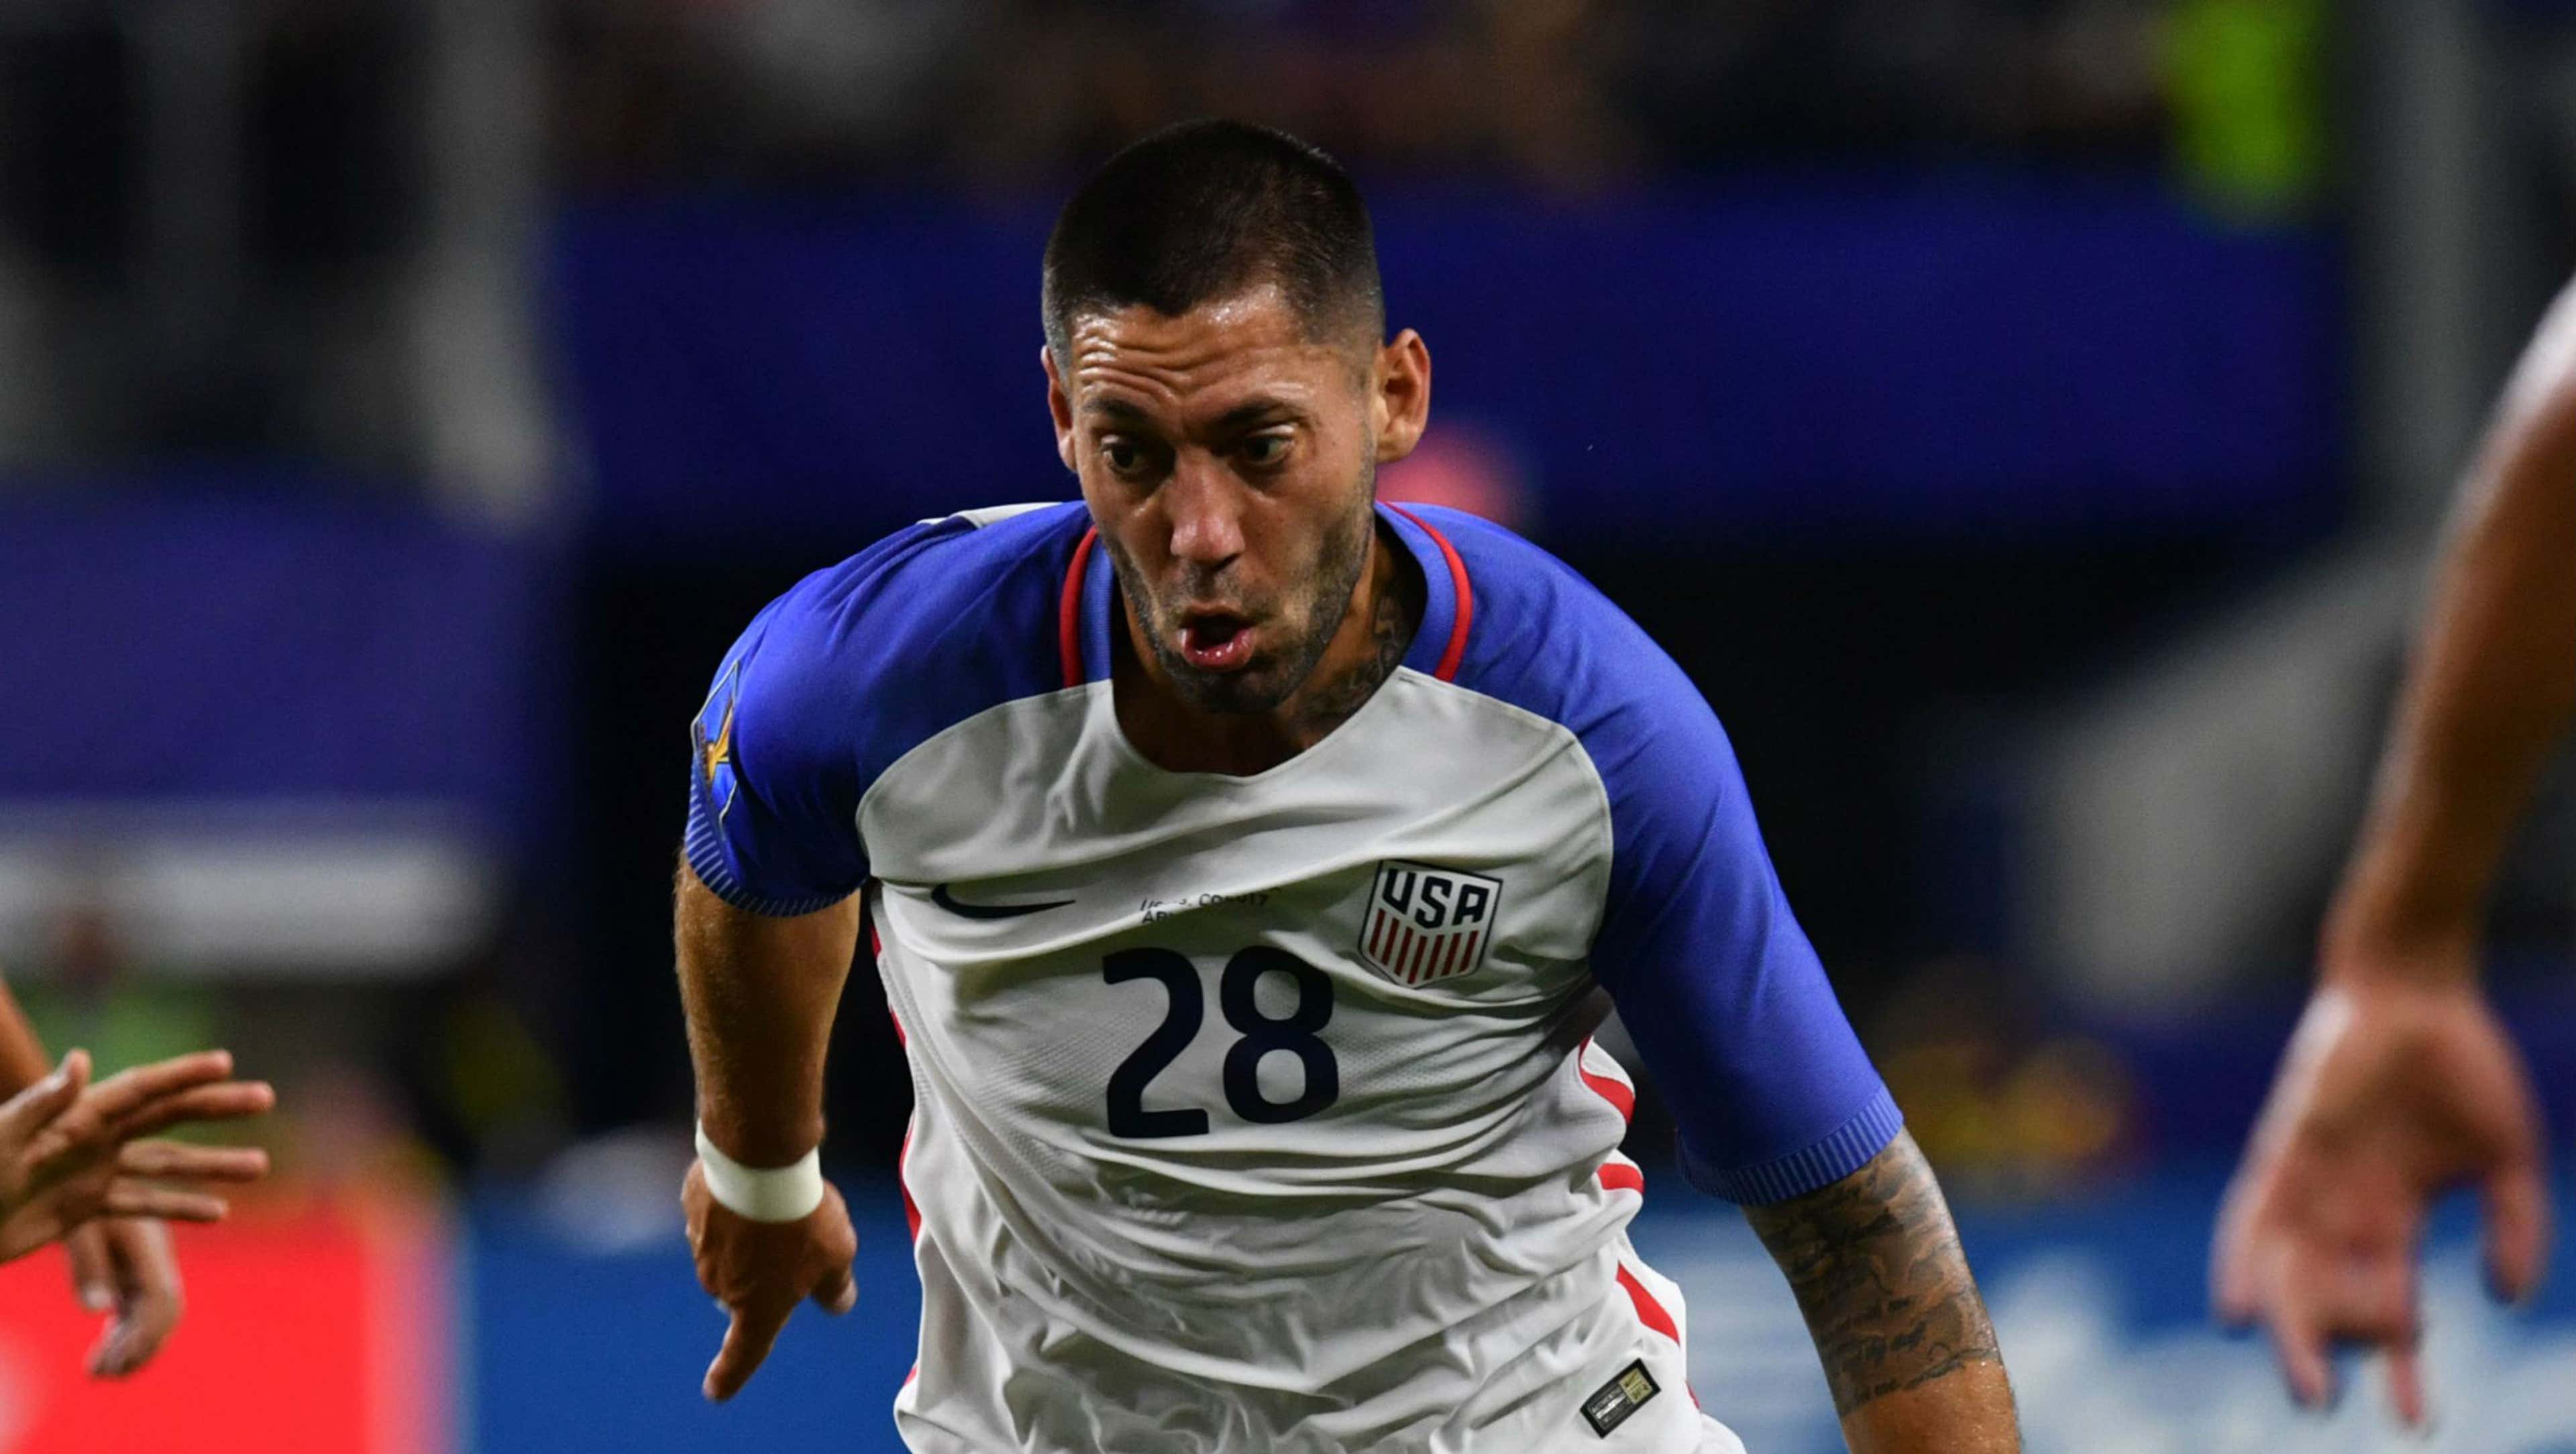 Clint Dempsey Ethnicity, What is Clint Dempsey Ethnicity? - News